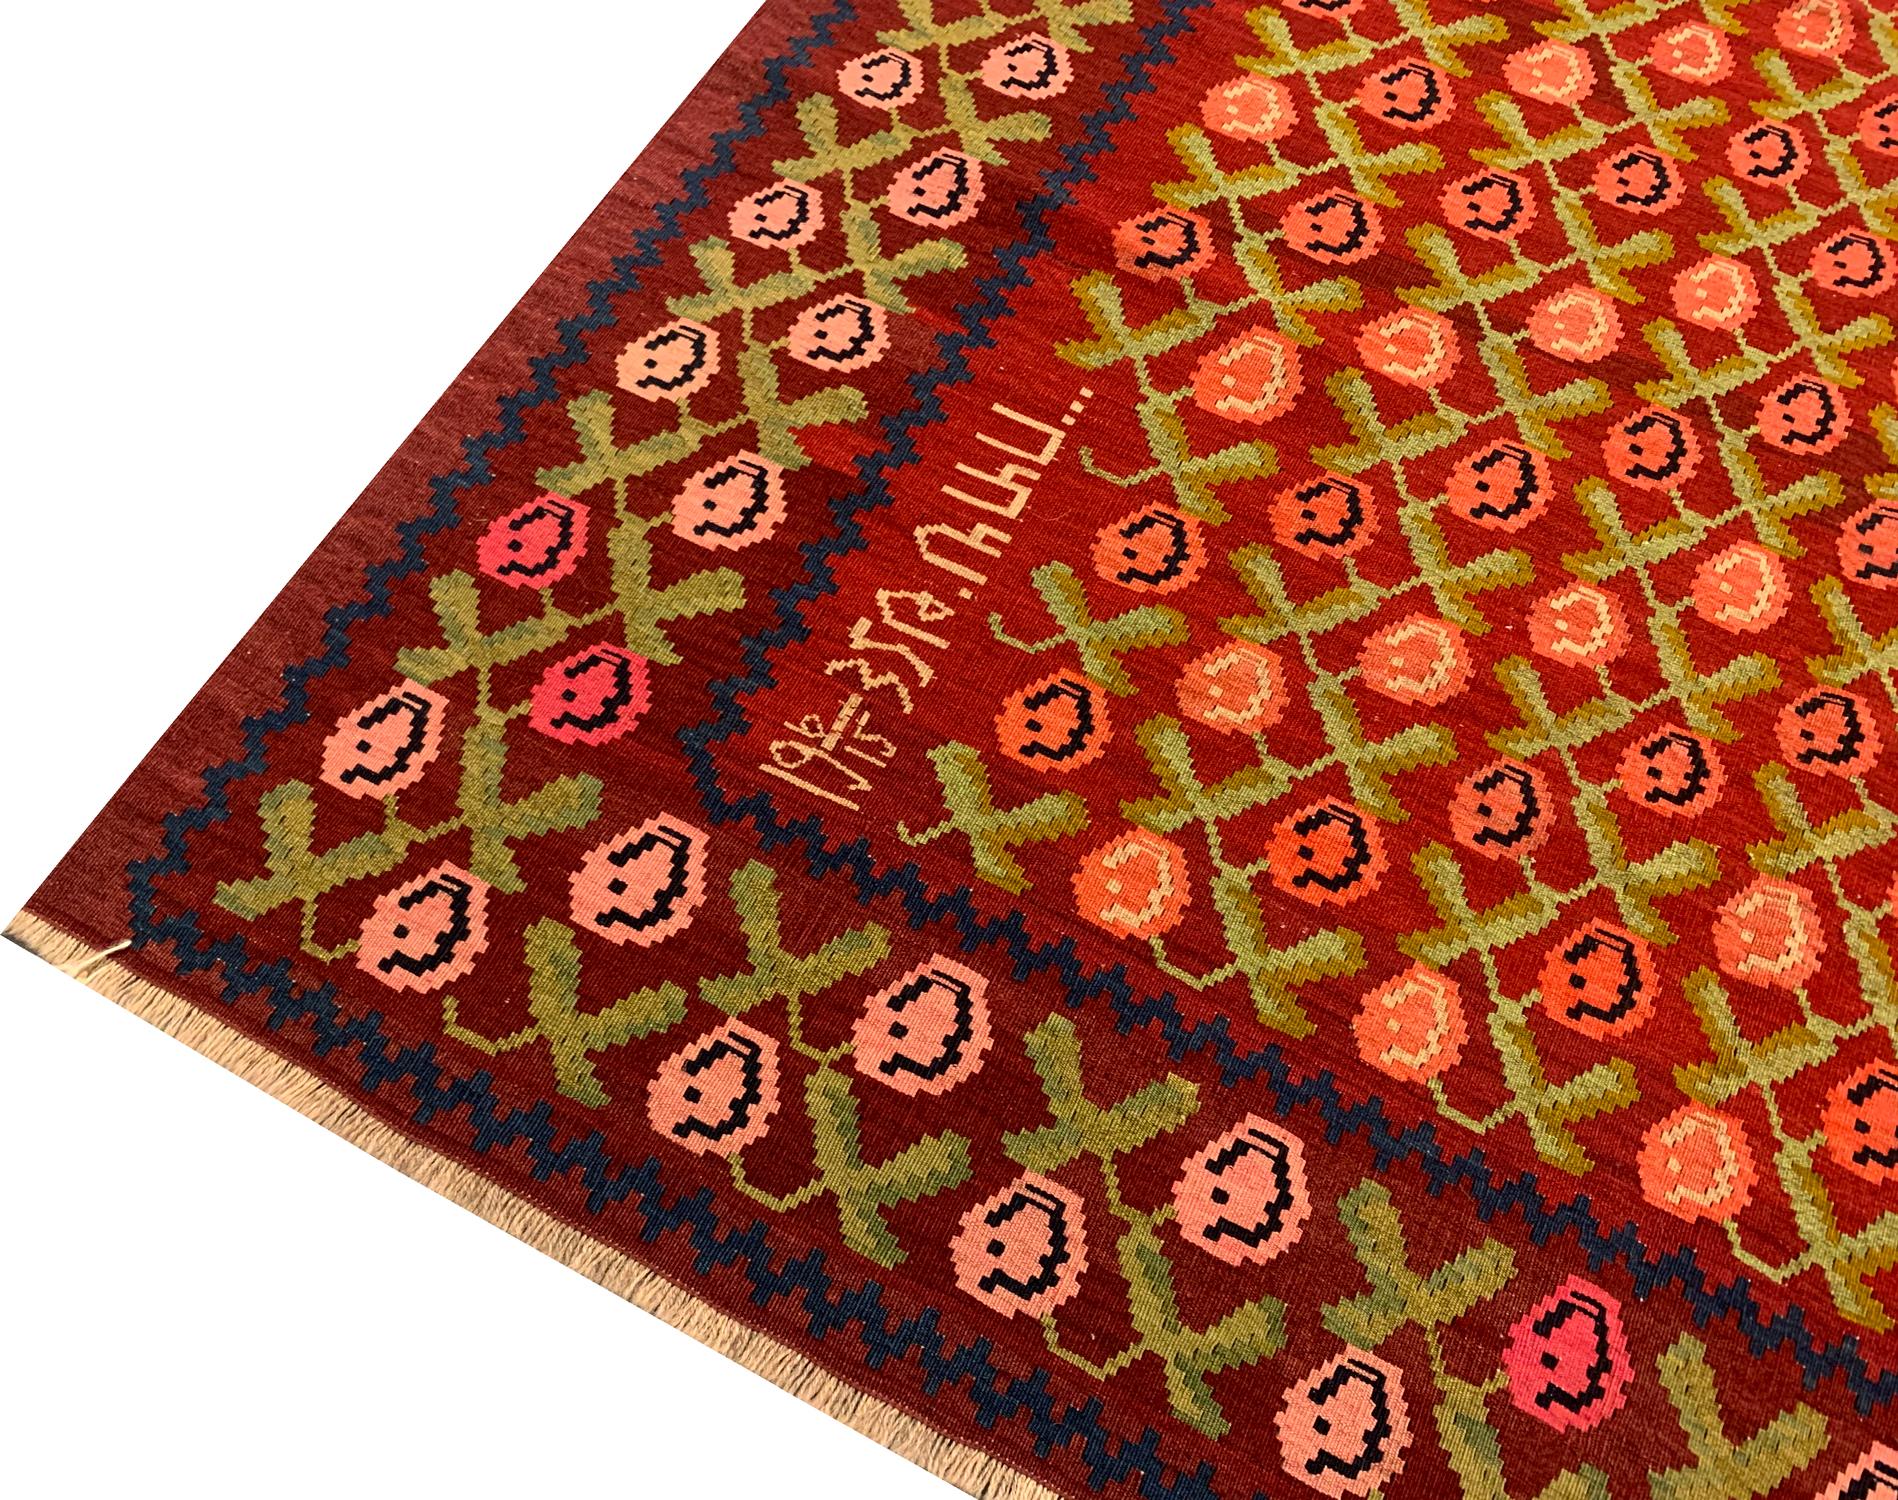 Woven Antique Kilim Rugs Armenian Handmade Floral Kilim Red Wool Rug For Sale